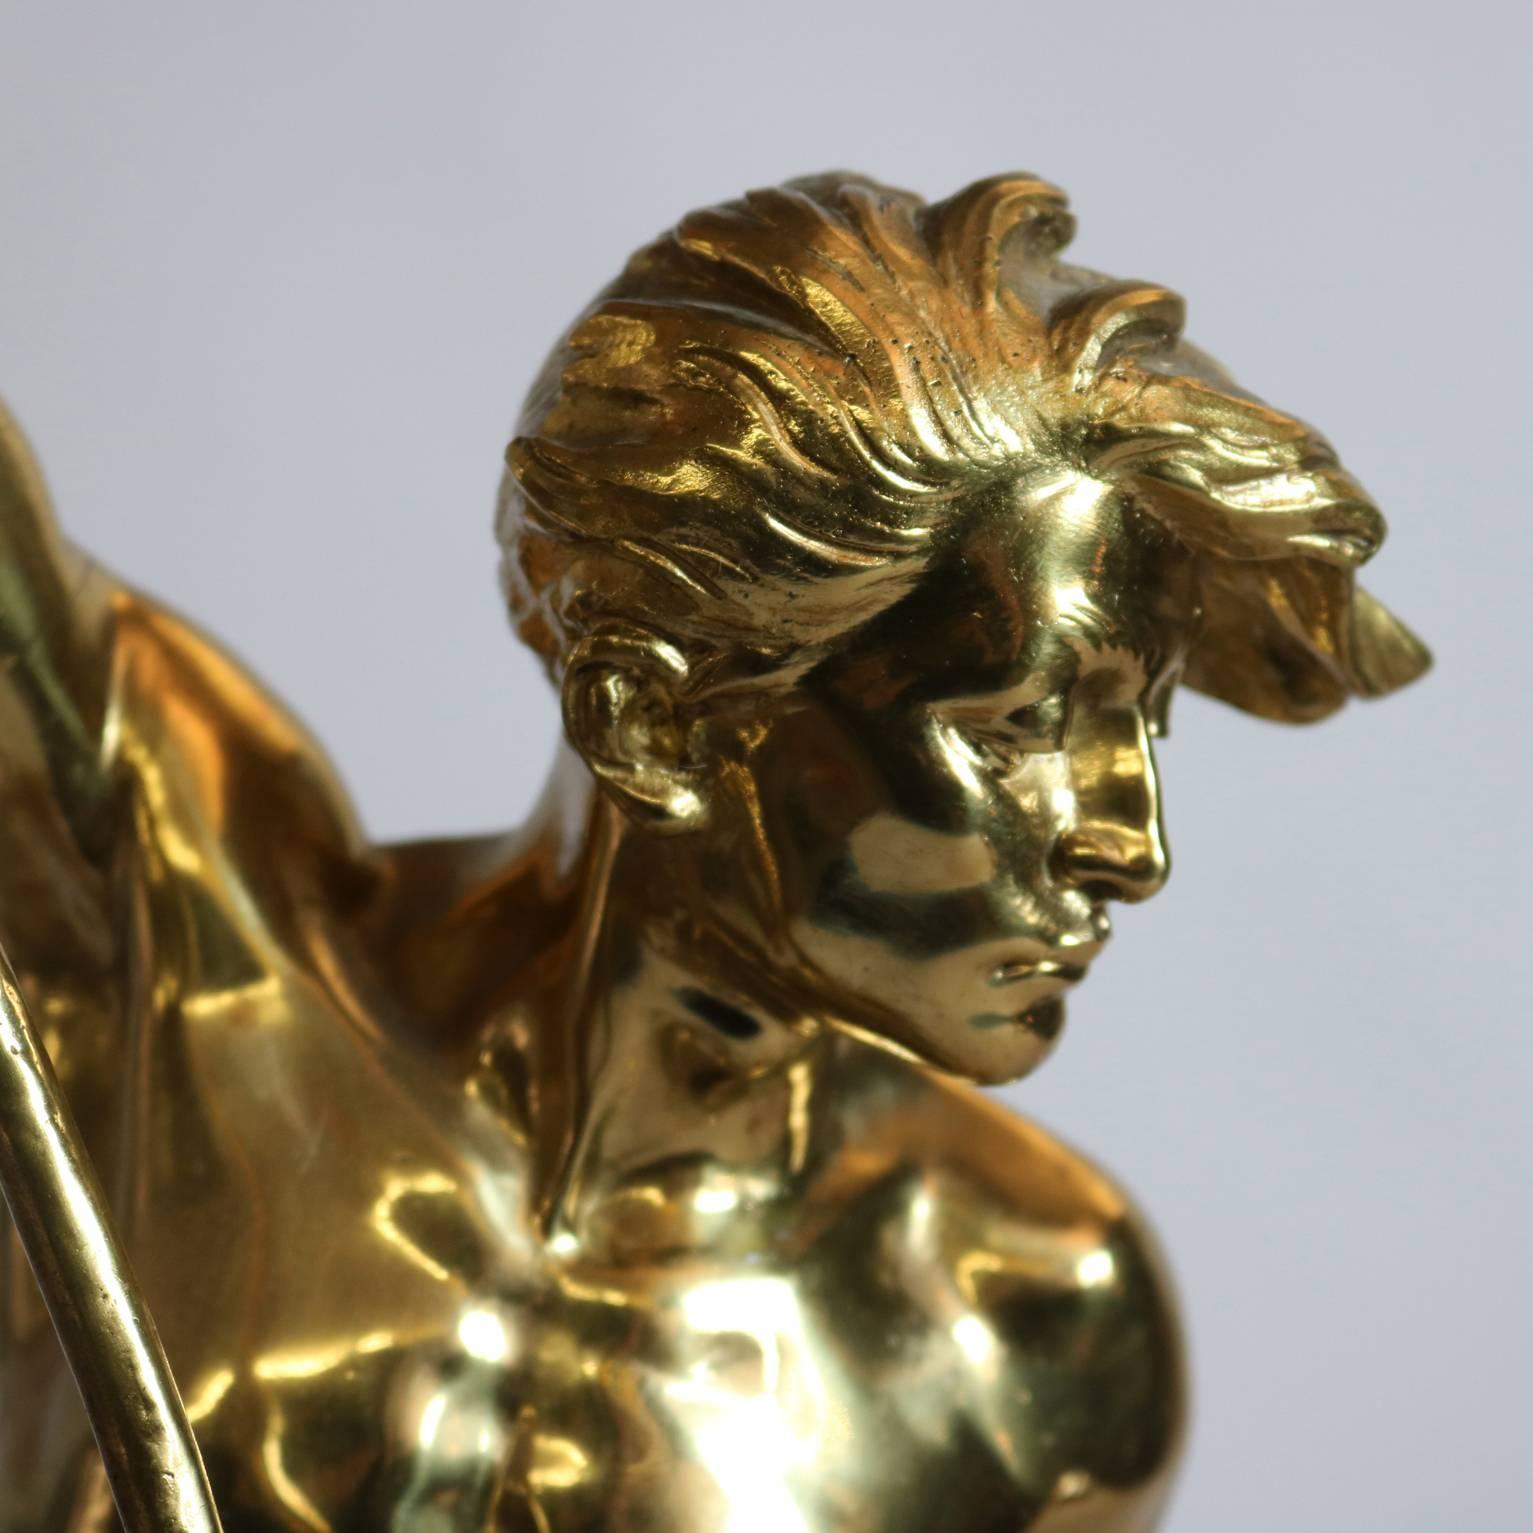 Italian neoclassical polished gilt cast portrait sculpture depicts the young Poseidon thrusting his trident (bident), signed Ferrano, circa 1870

Measures: 33